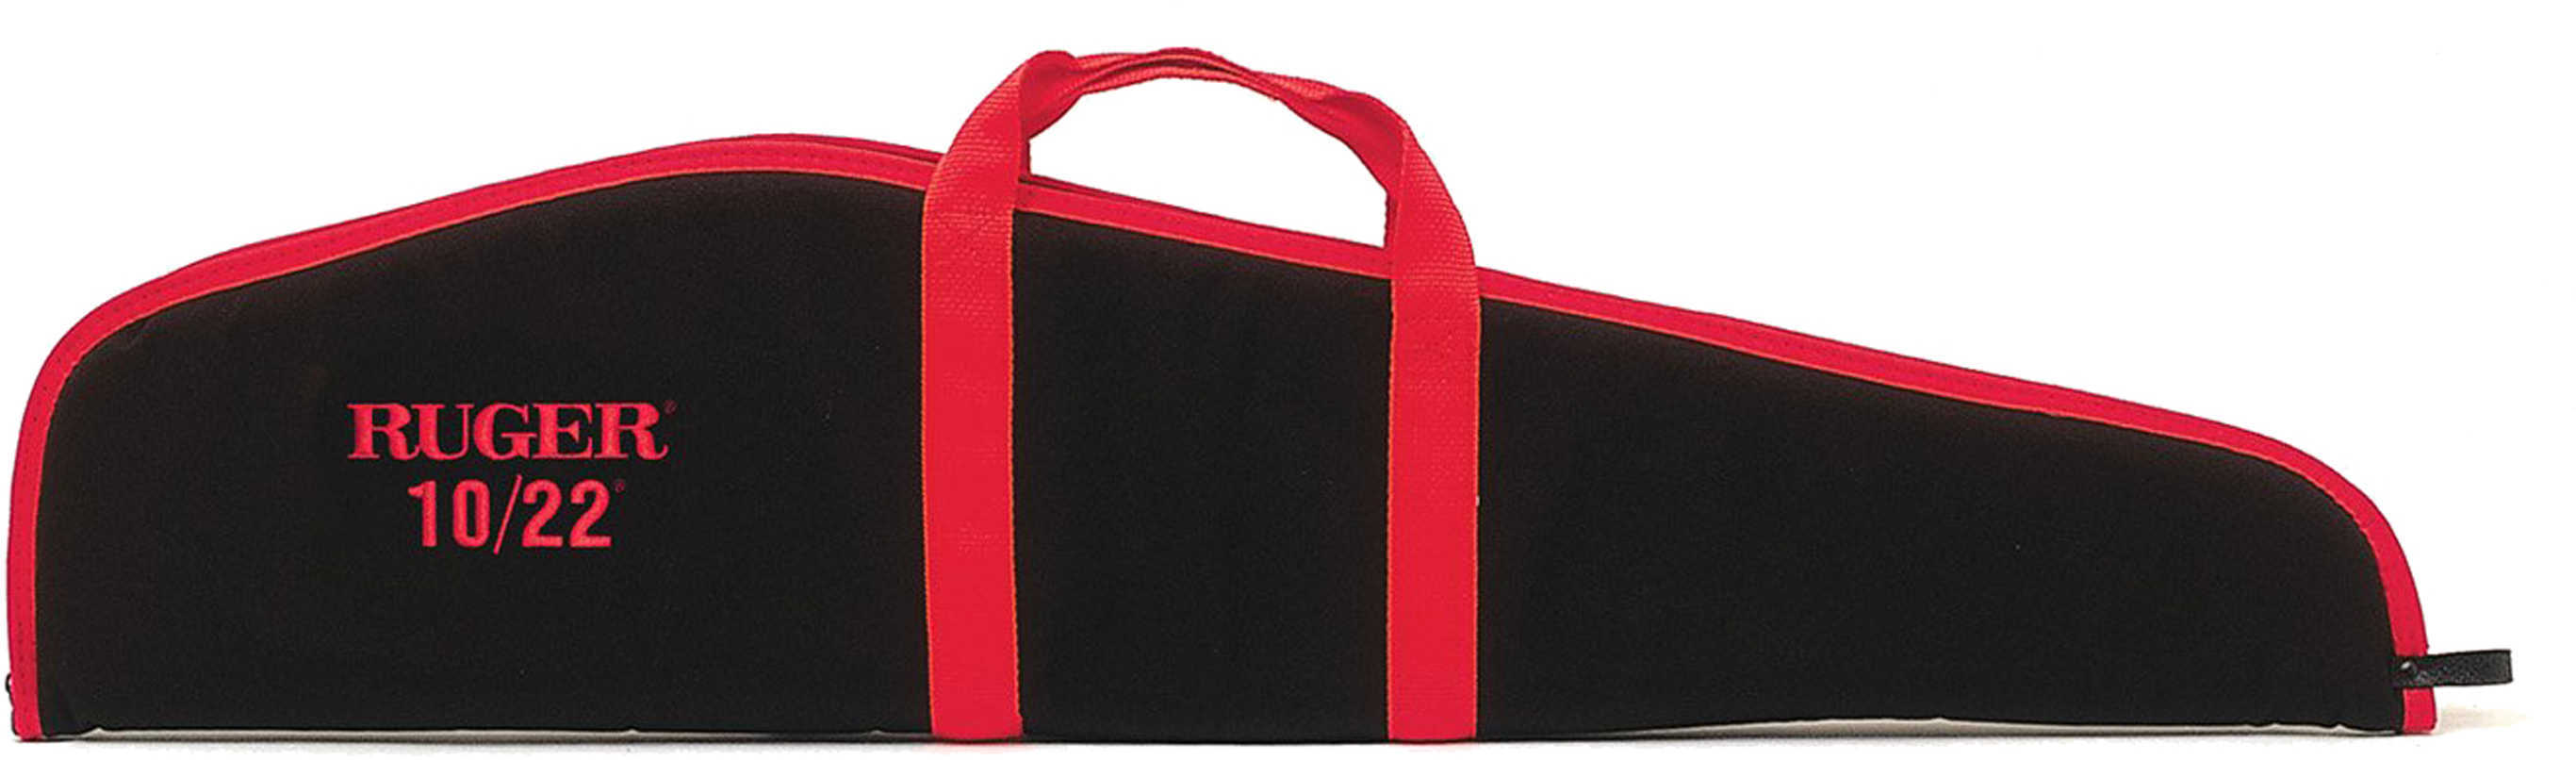 Allen Ruger® EmbroideRed 10/22® Rifle Case 40" - Black endura outer With Red Trim And "Ruger® 10/22®" Embroidery - 7/8"